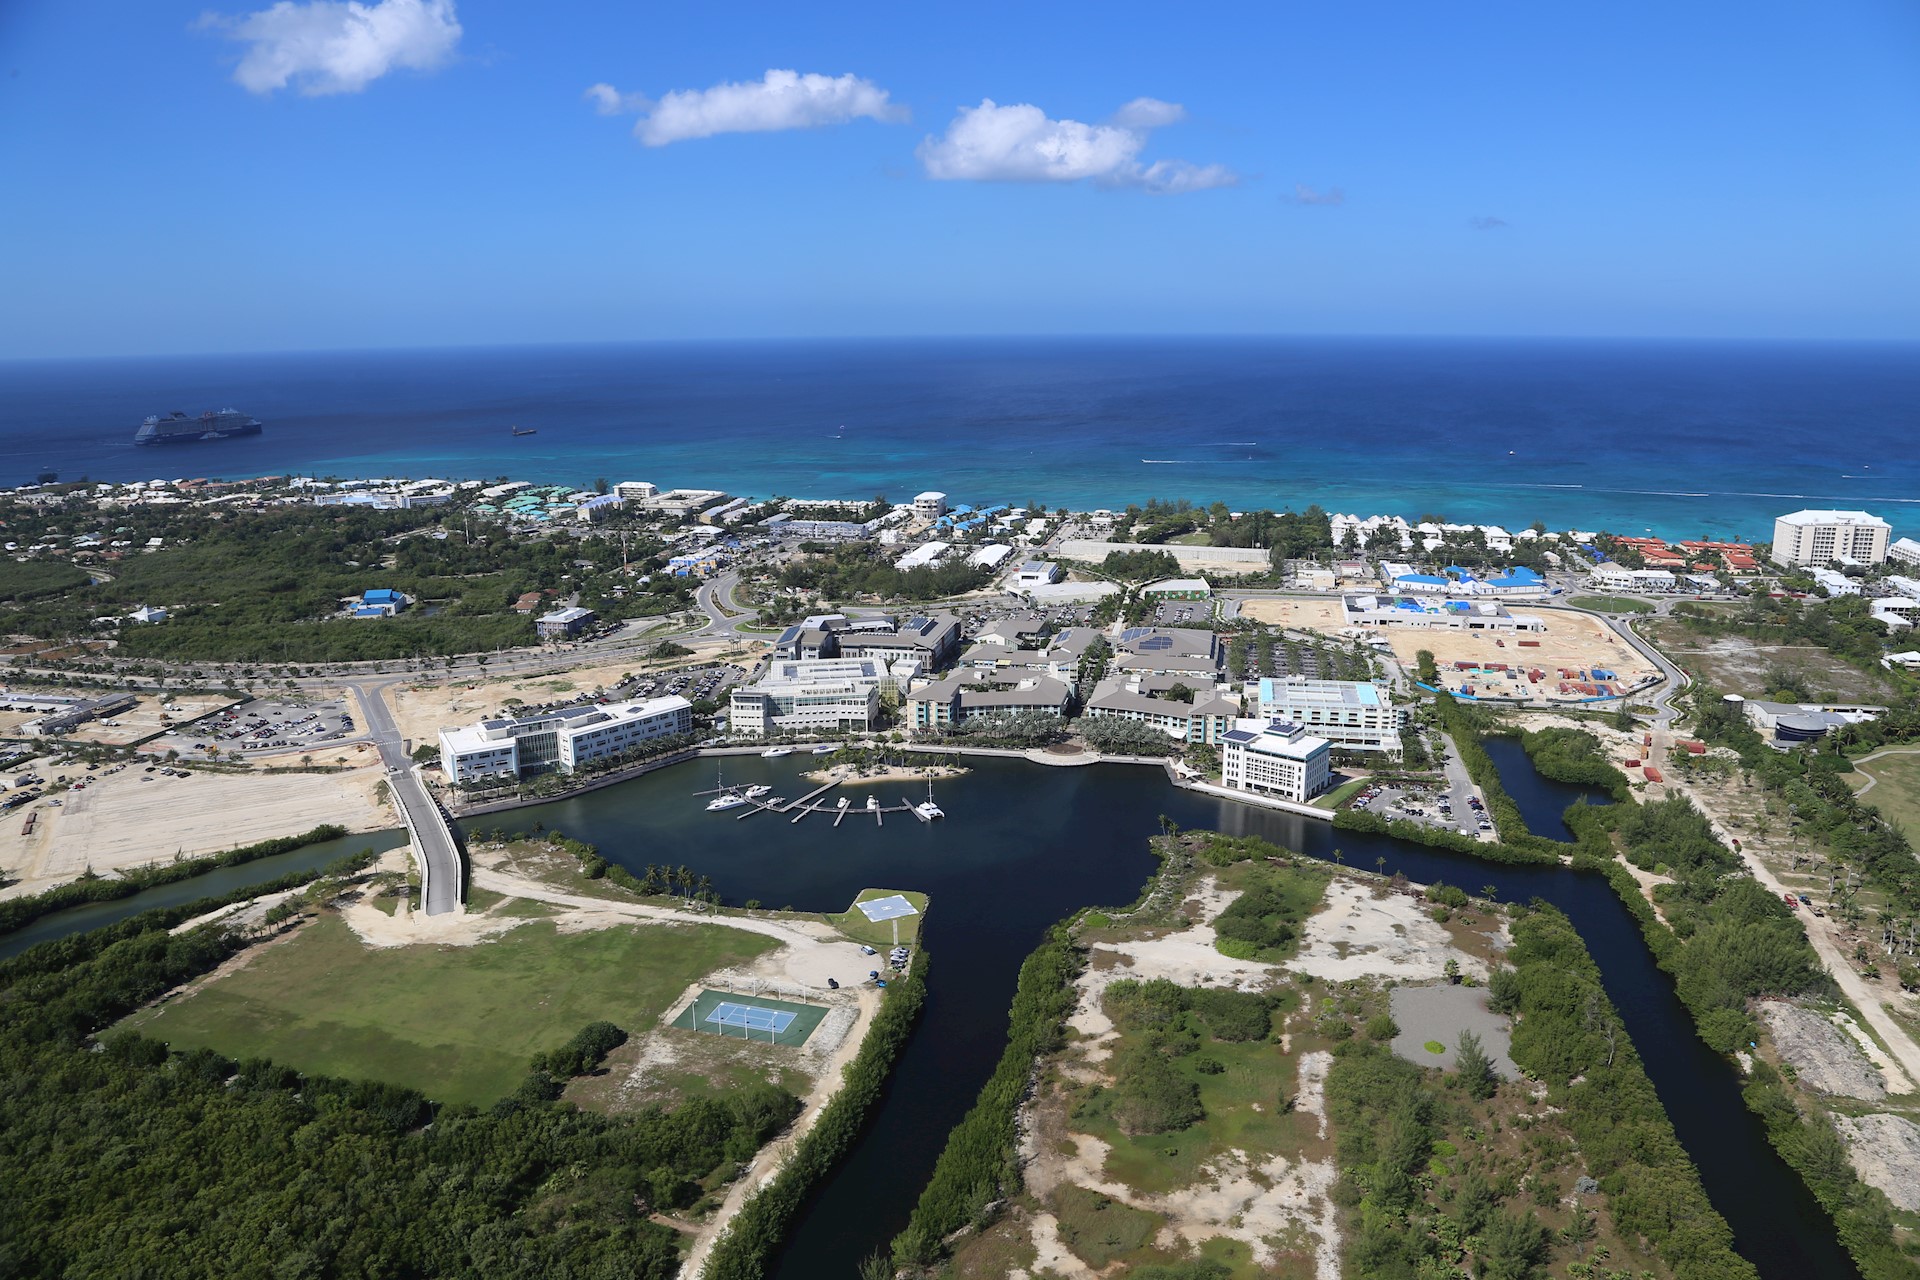 Media statement: The next phase of growth at Camana Bay begins